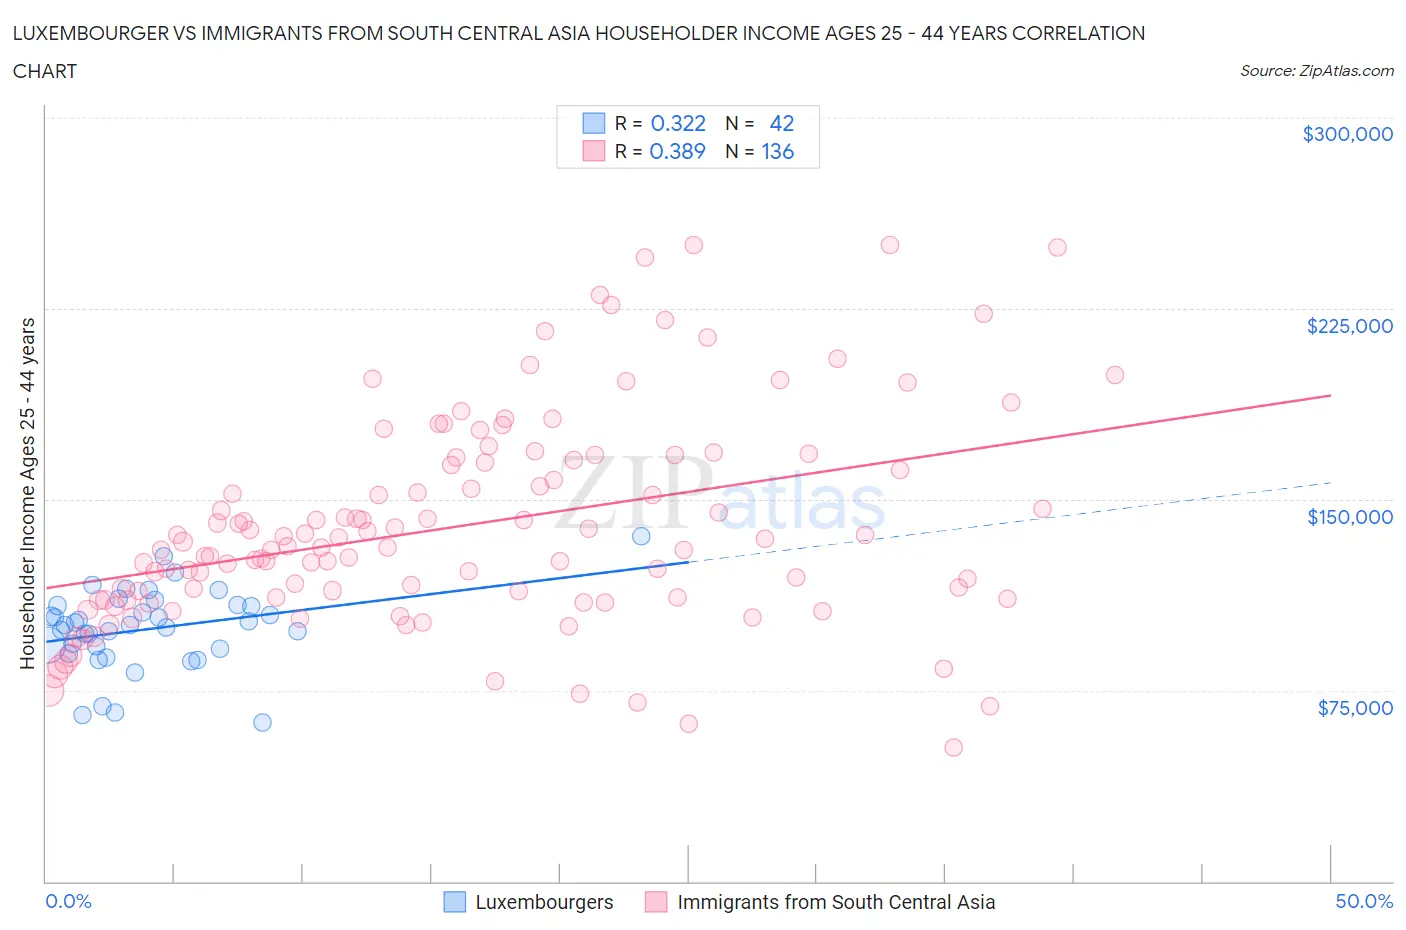 Luxembourger vs Immigrants from South Central Asia Householder Income Ages 25 - 44 years